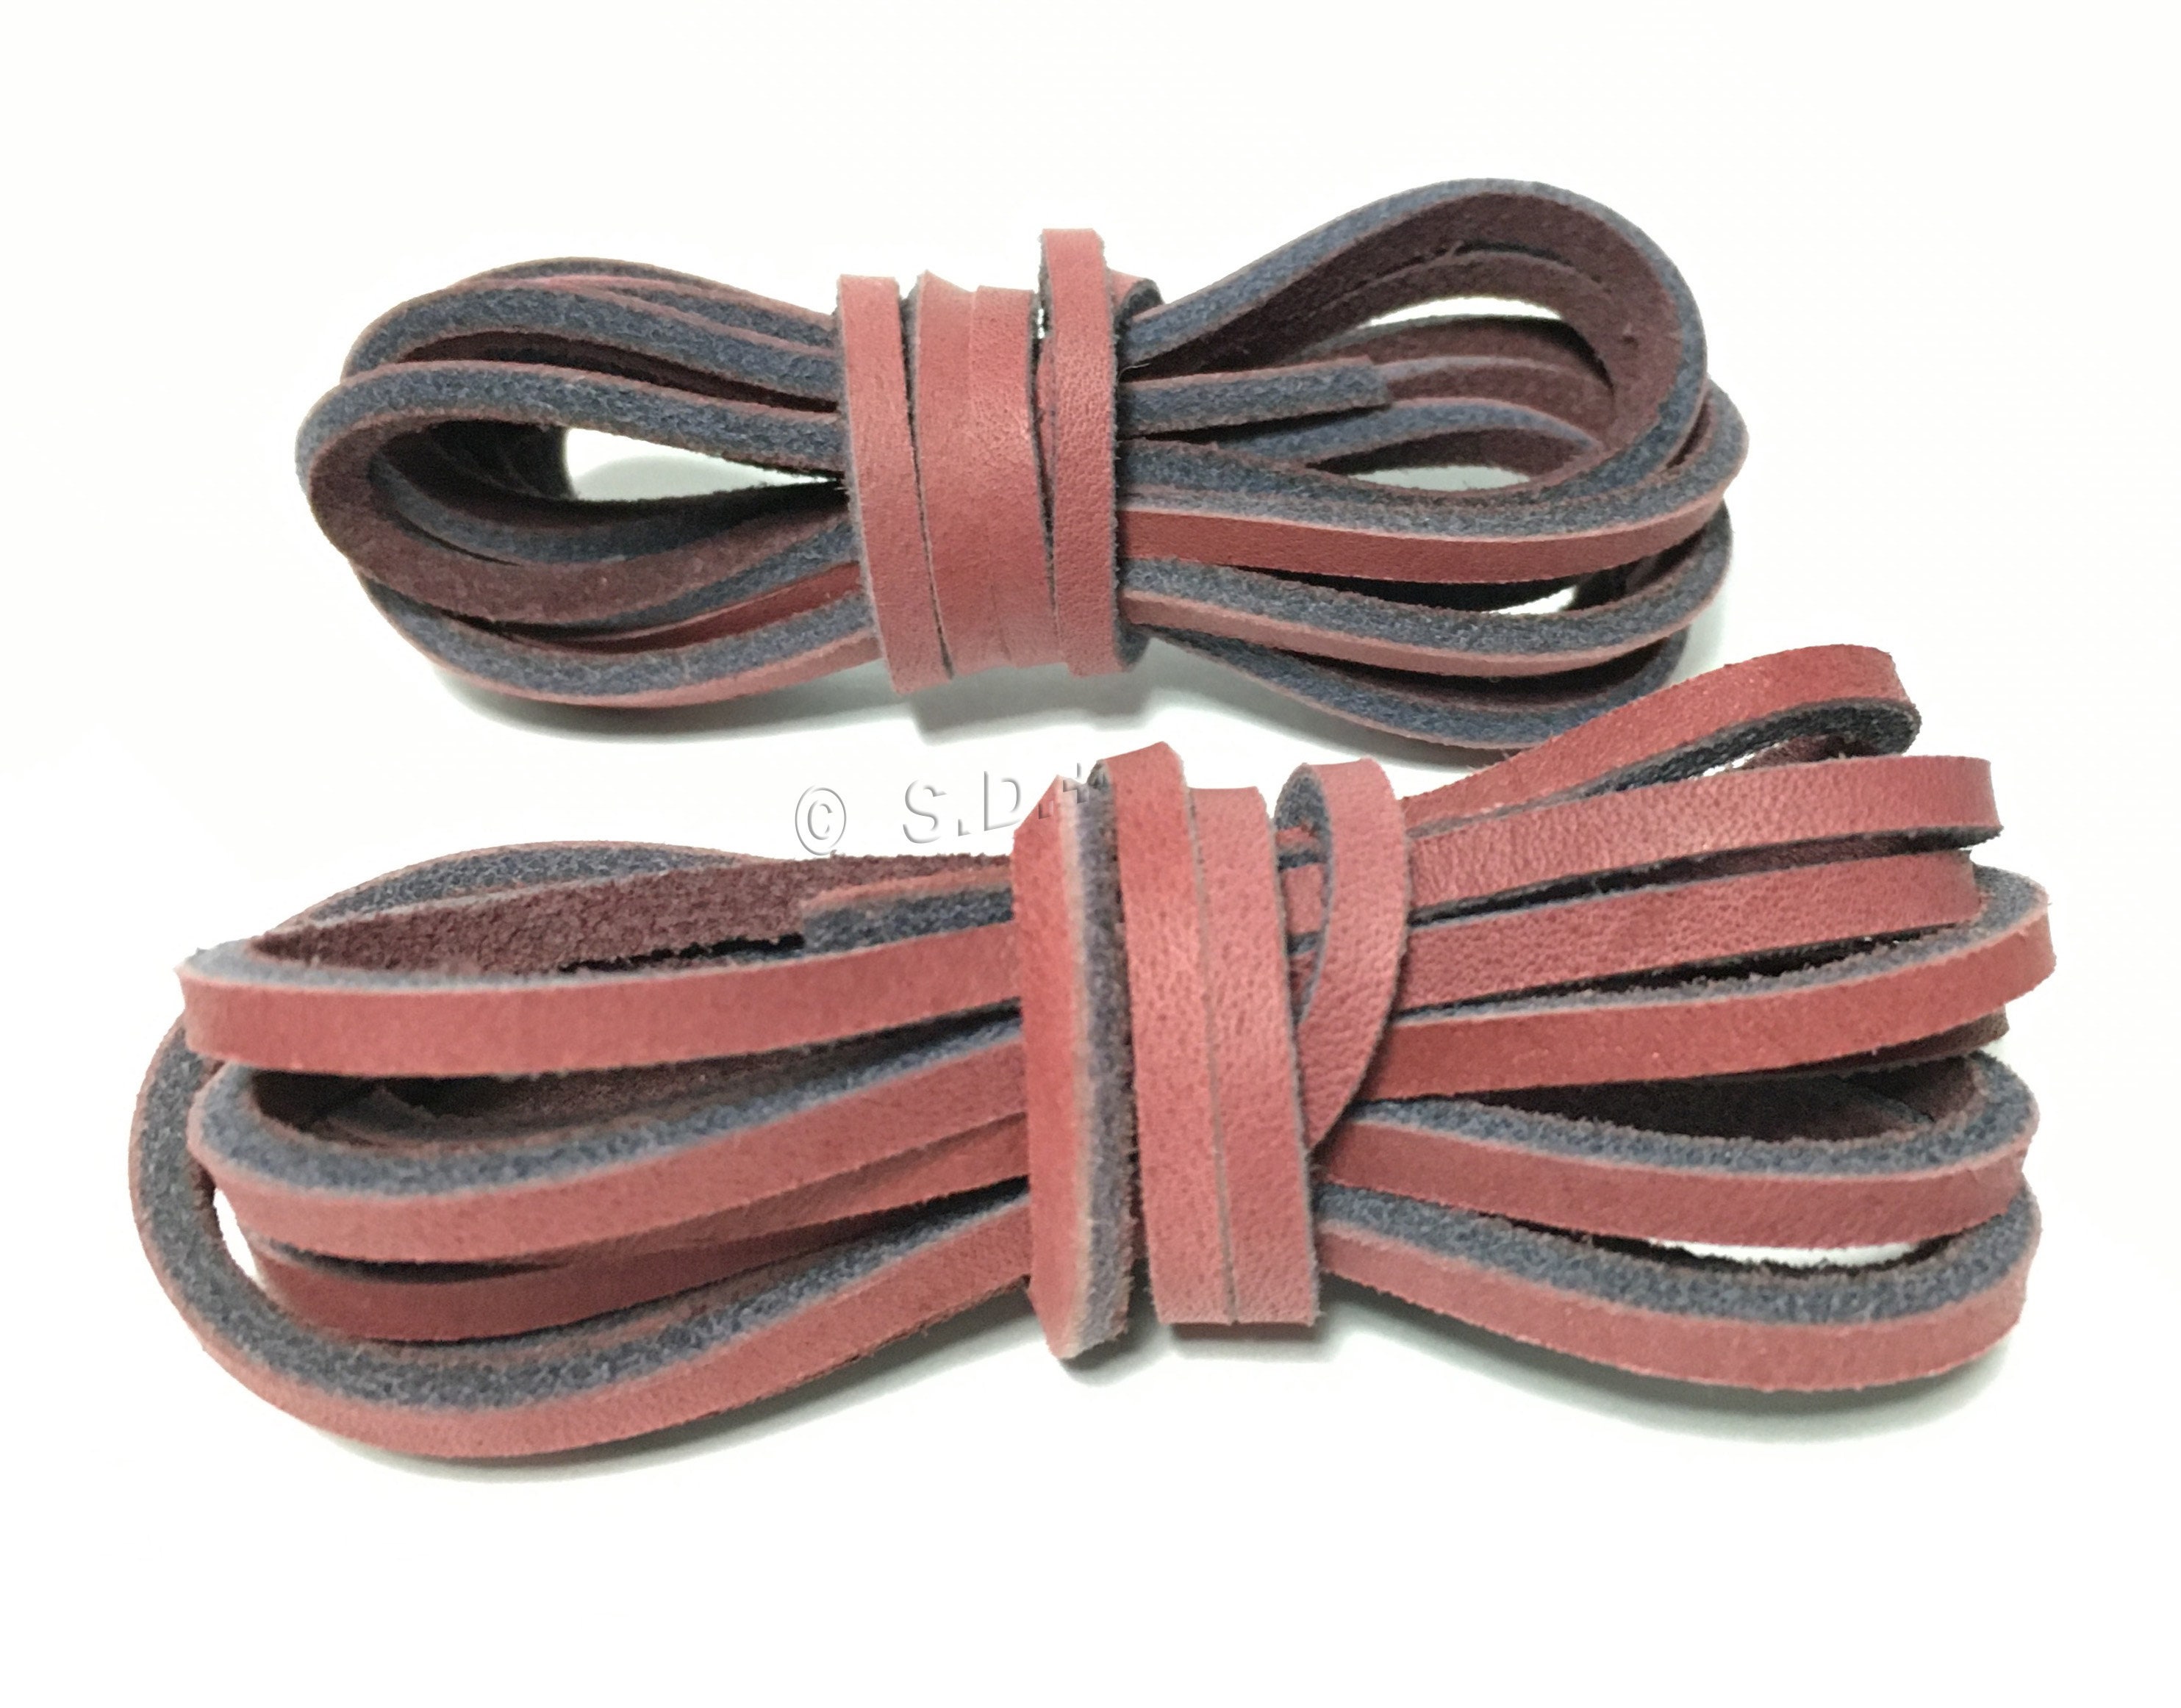 72 x 1/8 Rawhide Leather Shoelaces Sperry Topsider Moccasin Strings Boat Shoe Laces